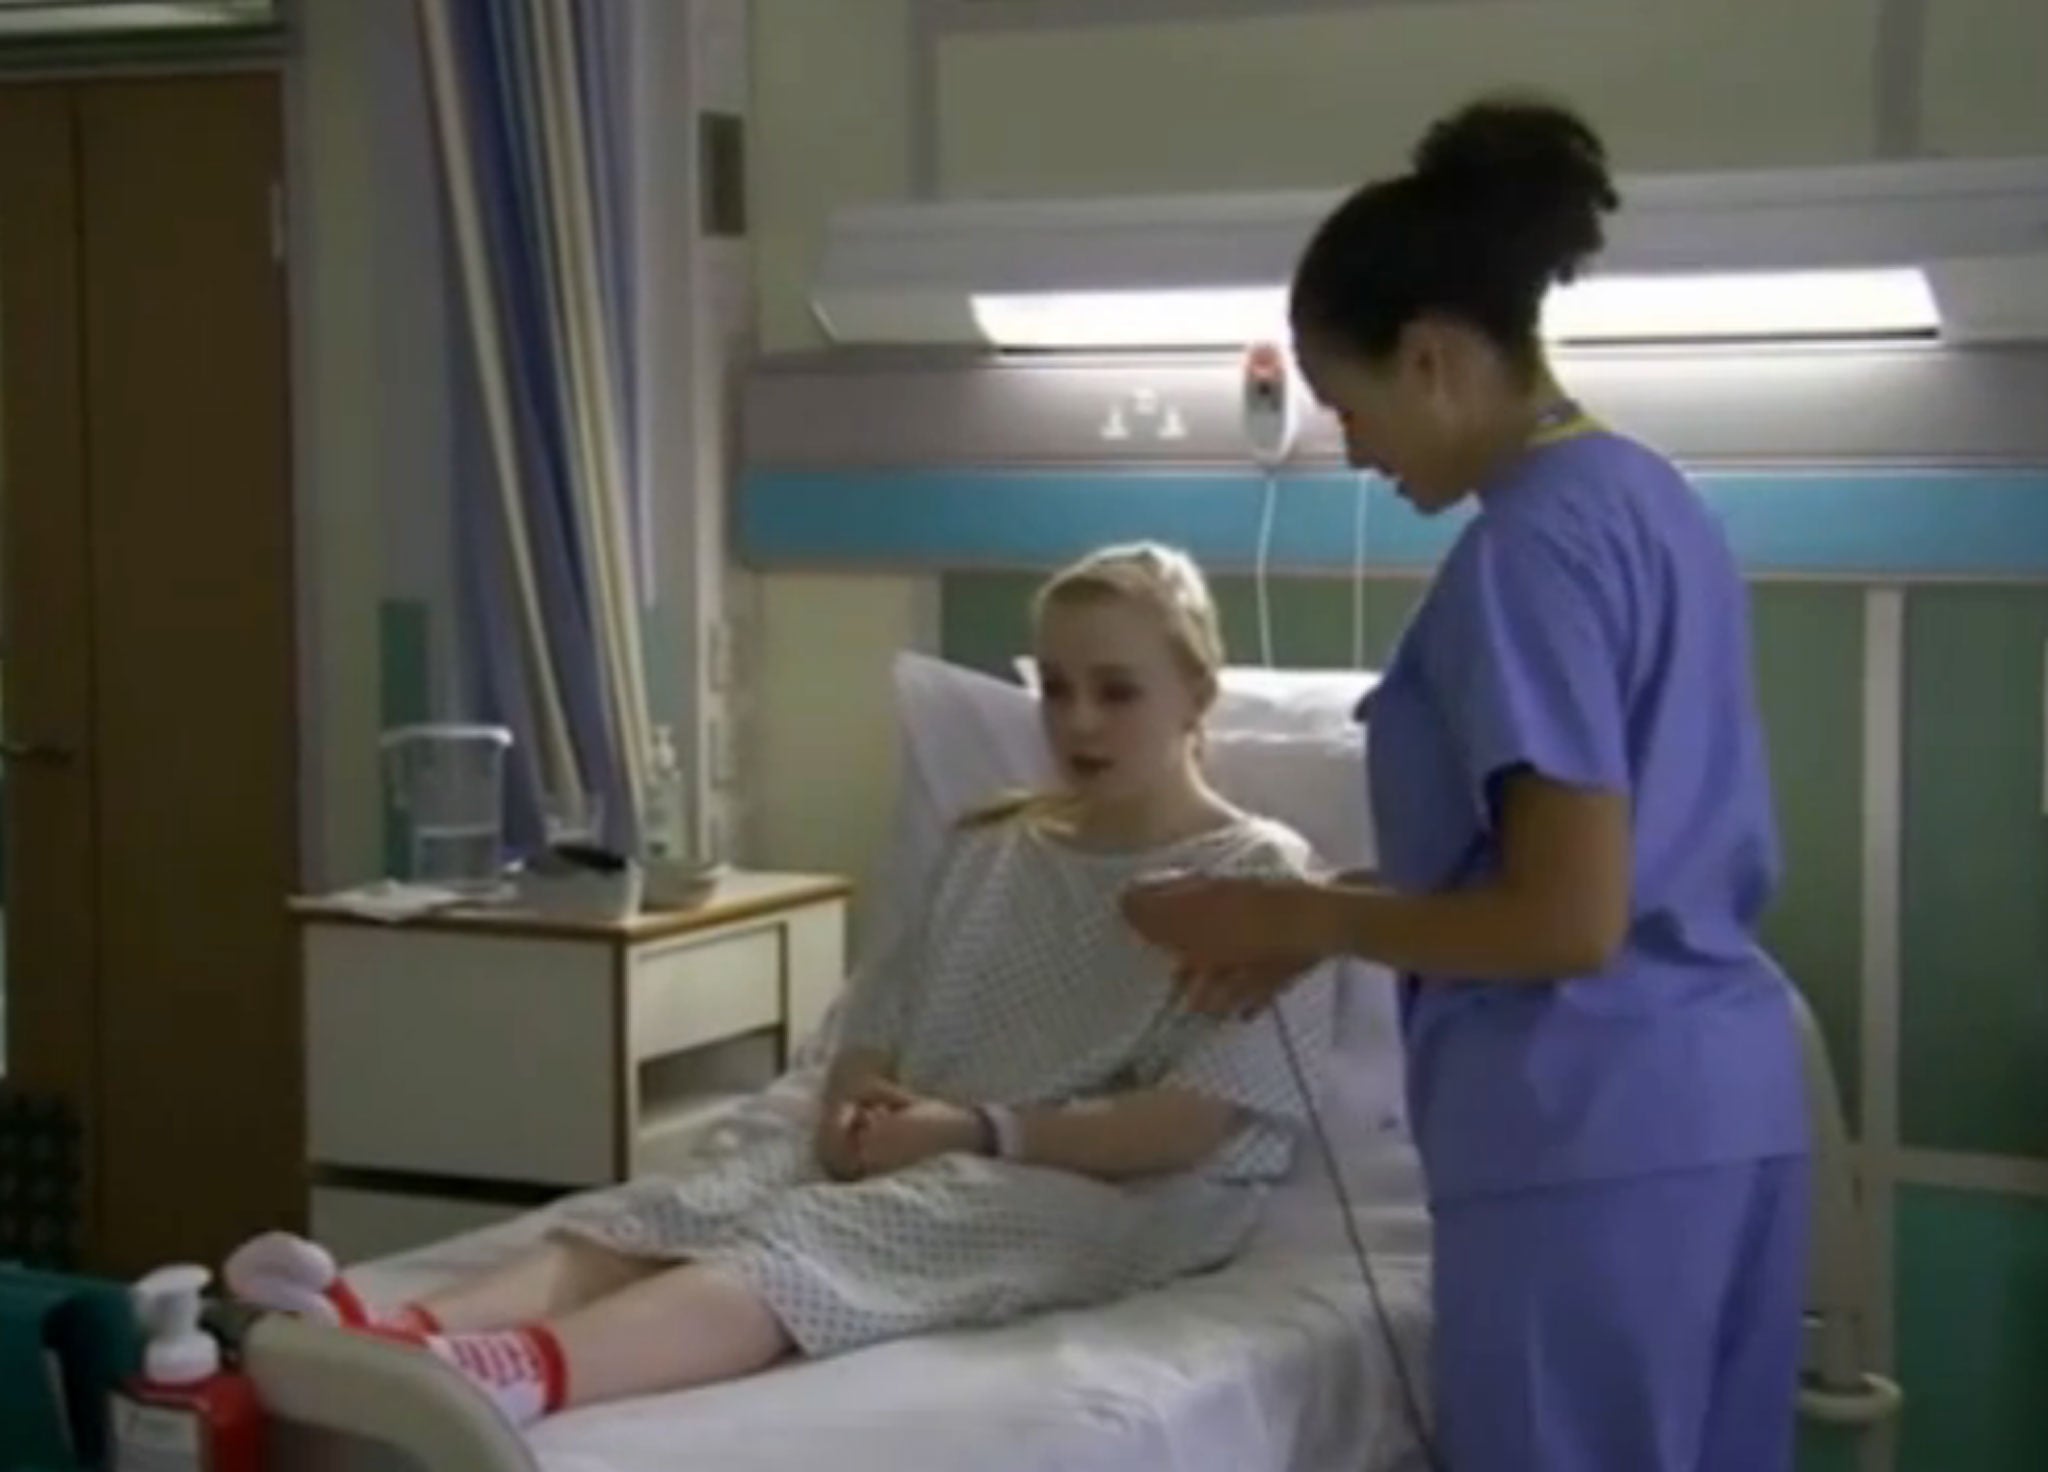 The BBC has received 30 complaints after a character in Holby City said she wanted to chainsaw Perrie Edwards' head off